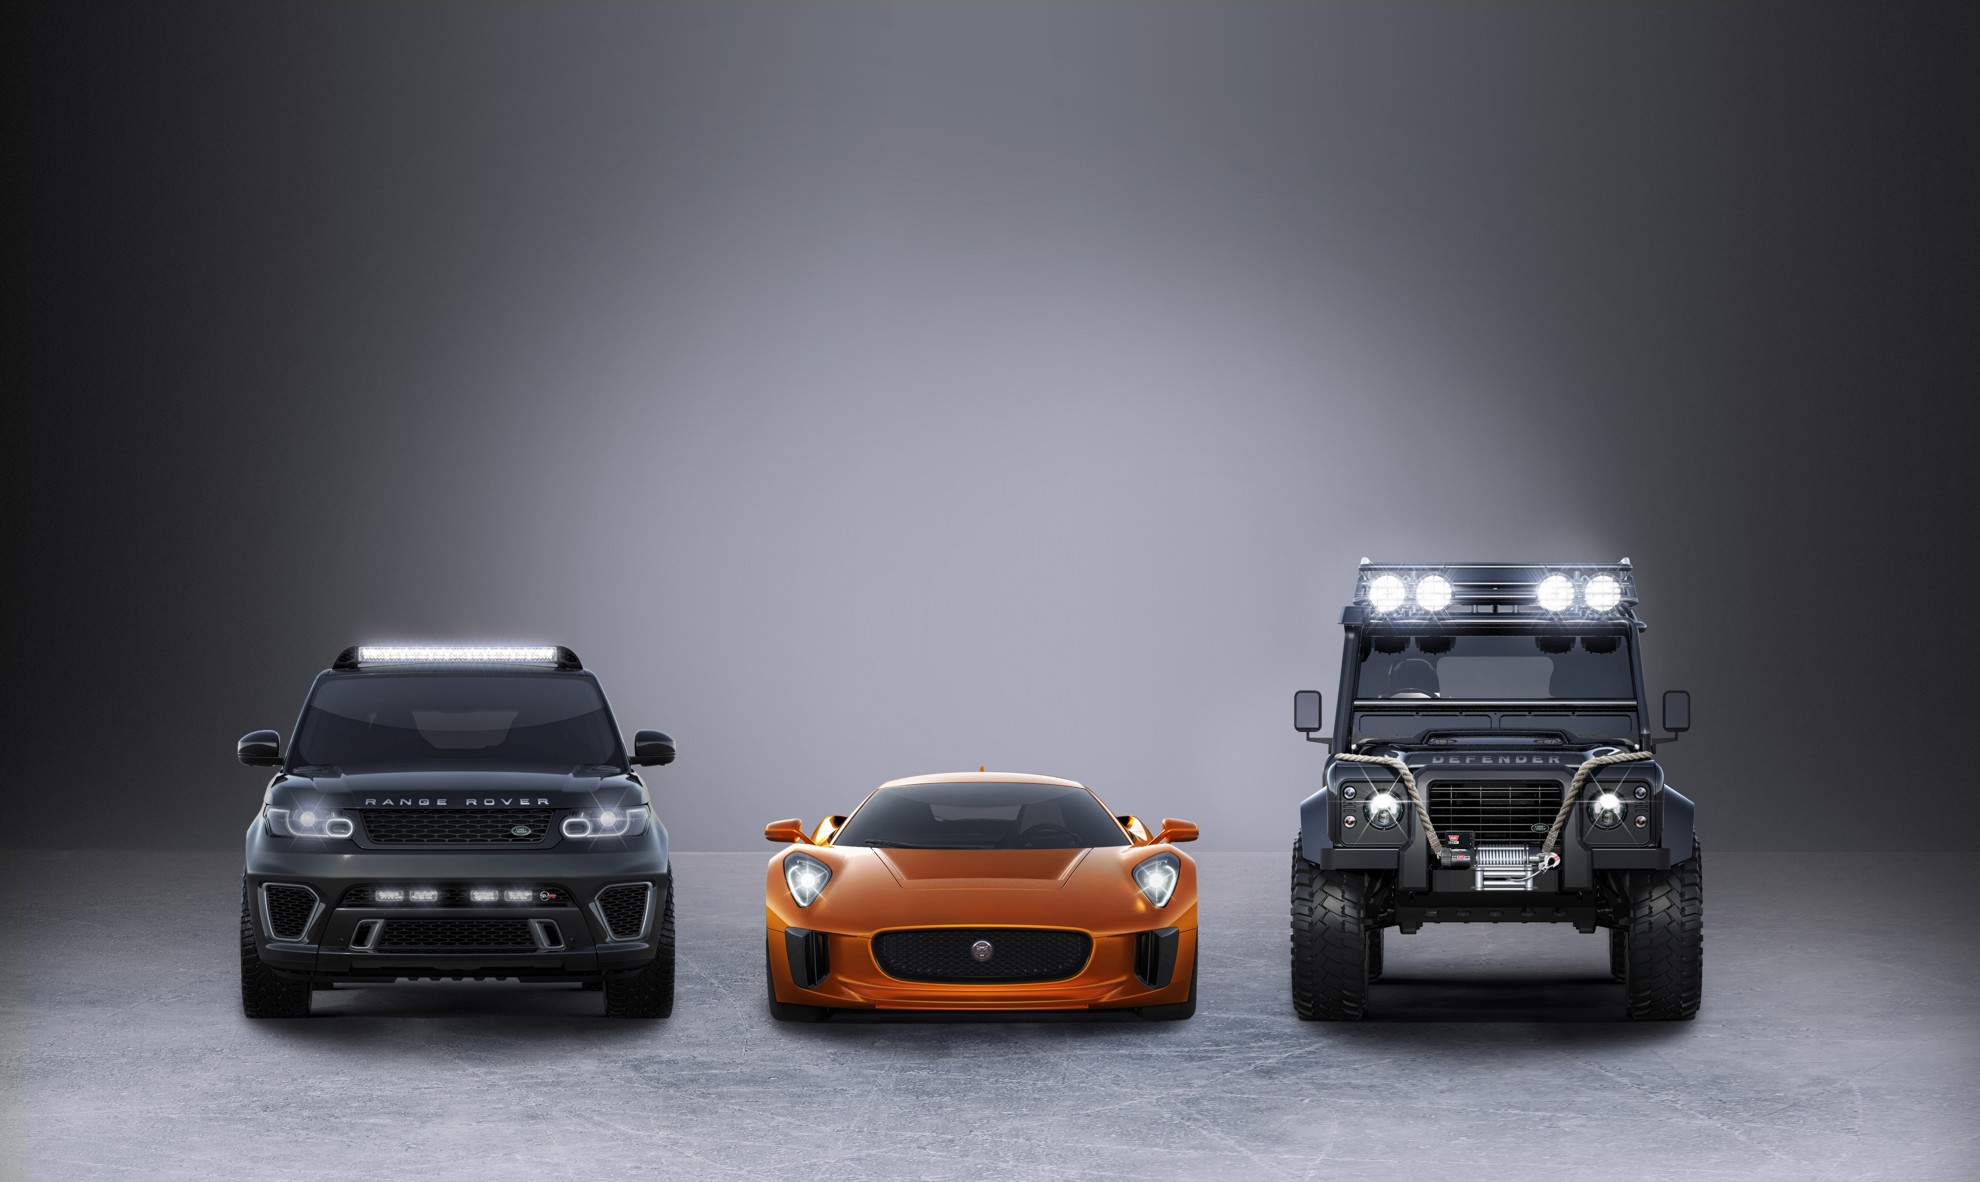 JAGUAR AND LAND ROVER ANNOUNCE PARTNERSHIP WITH SPECTRE, THE 24TH JAMES BOND ADVENTURE